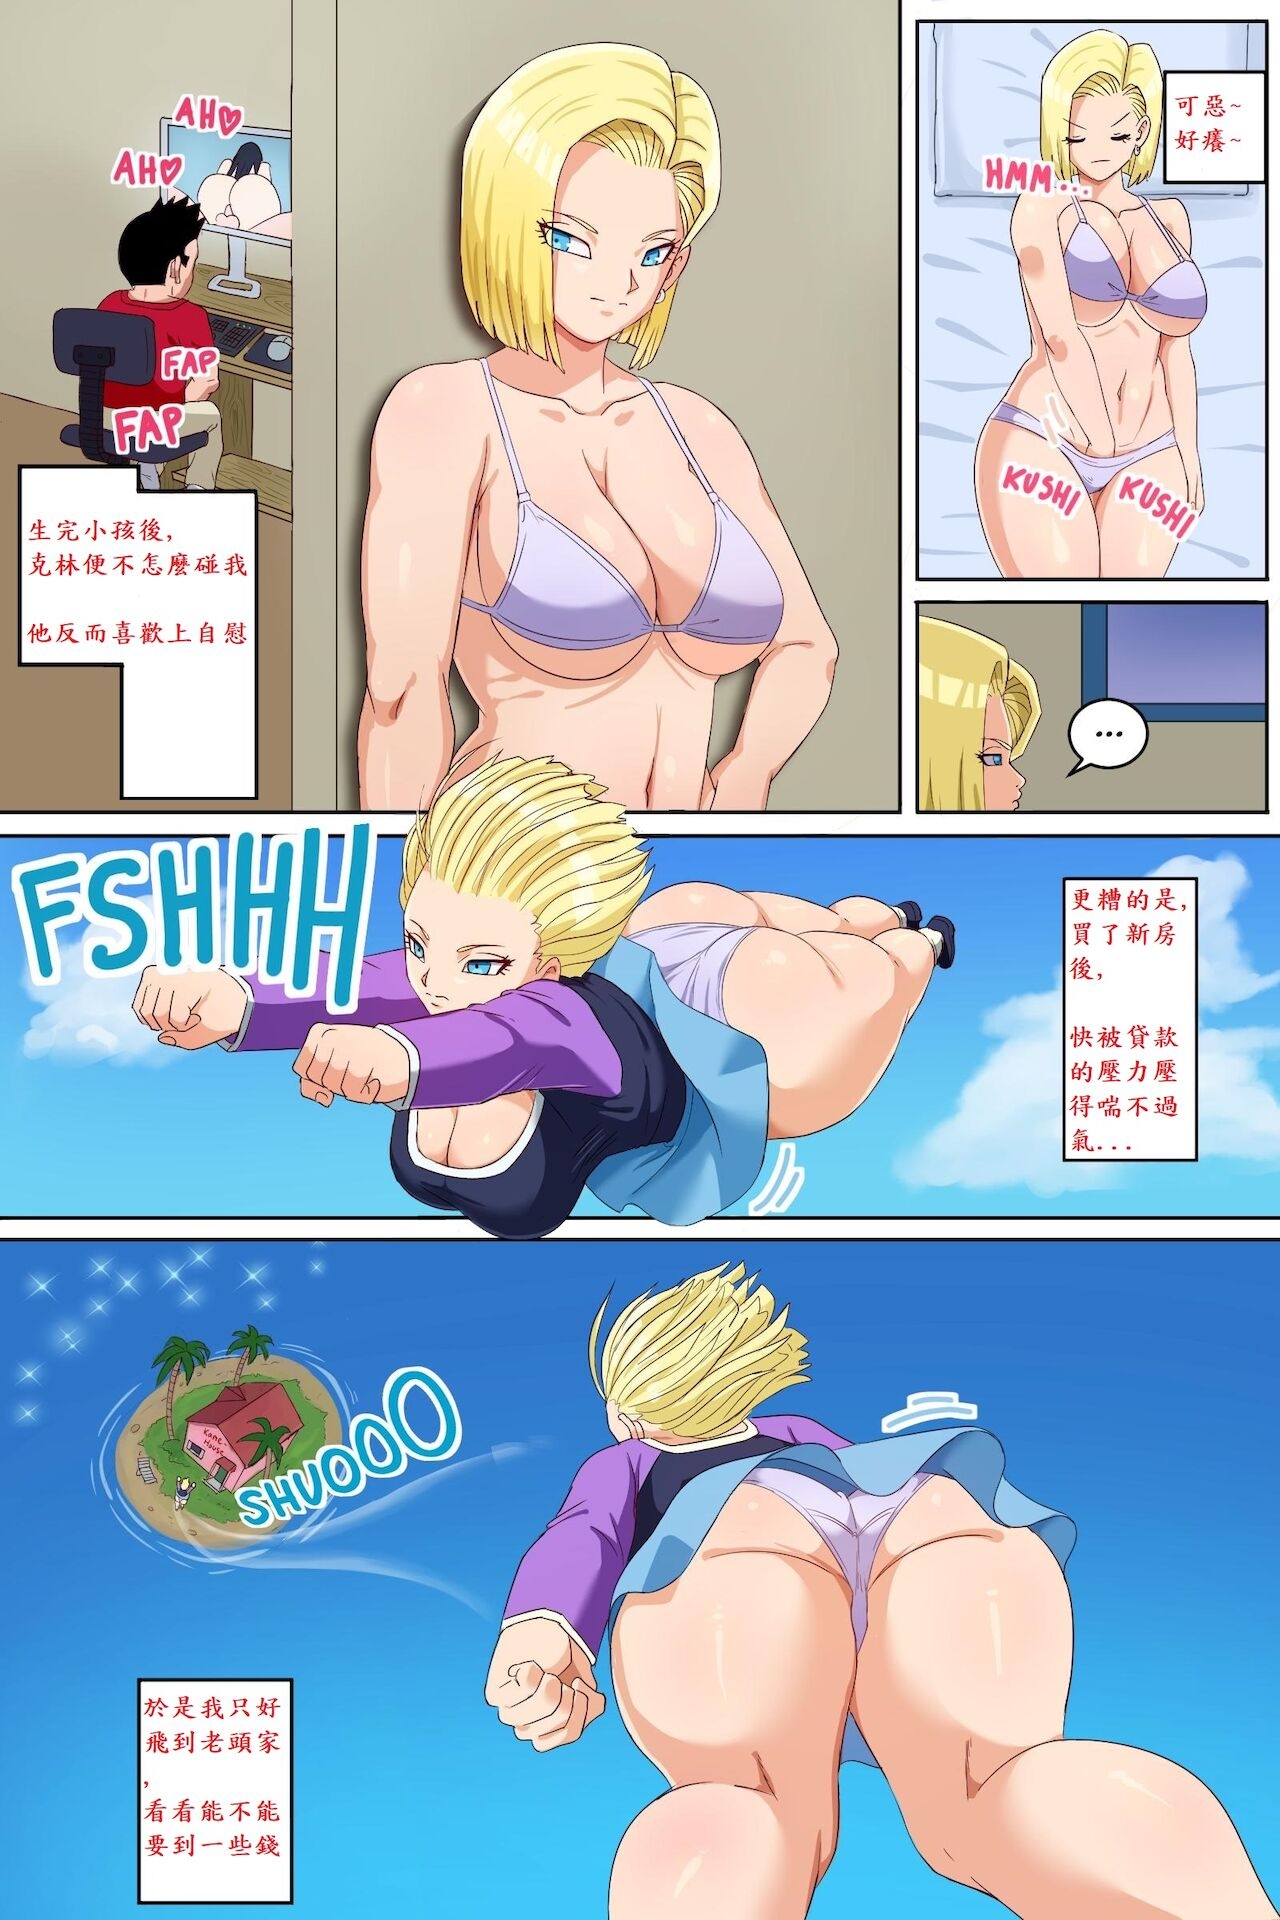 [Pink Pawg] Android 18 NTR 1 (Chinese) 1